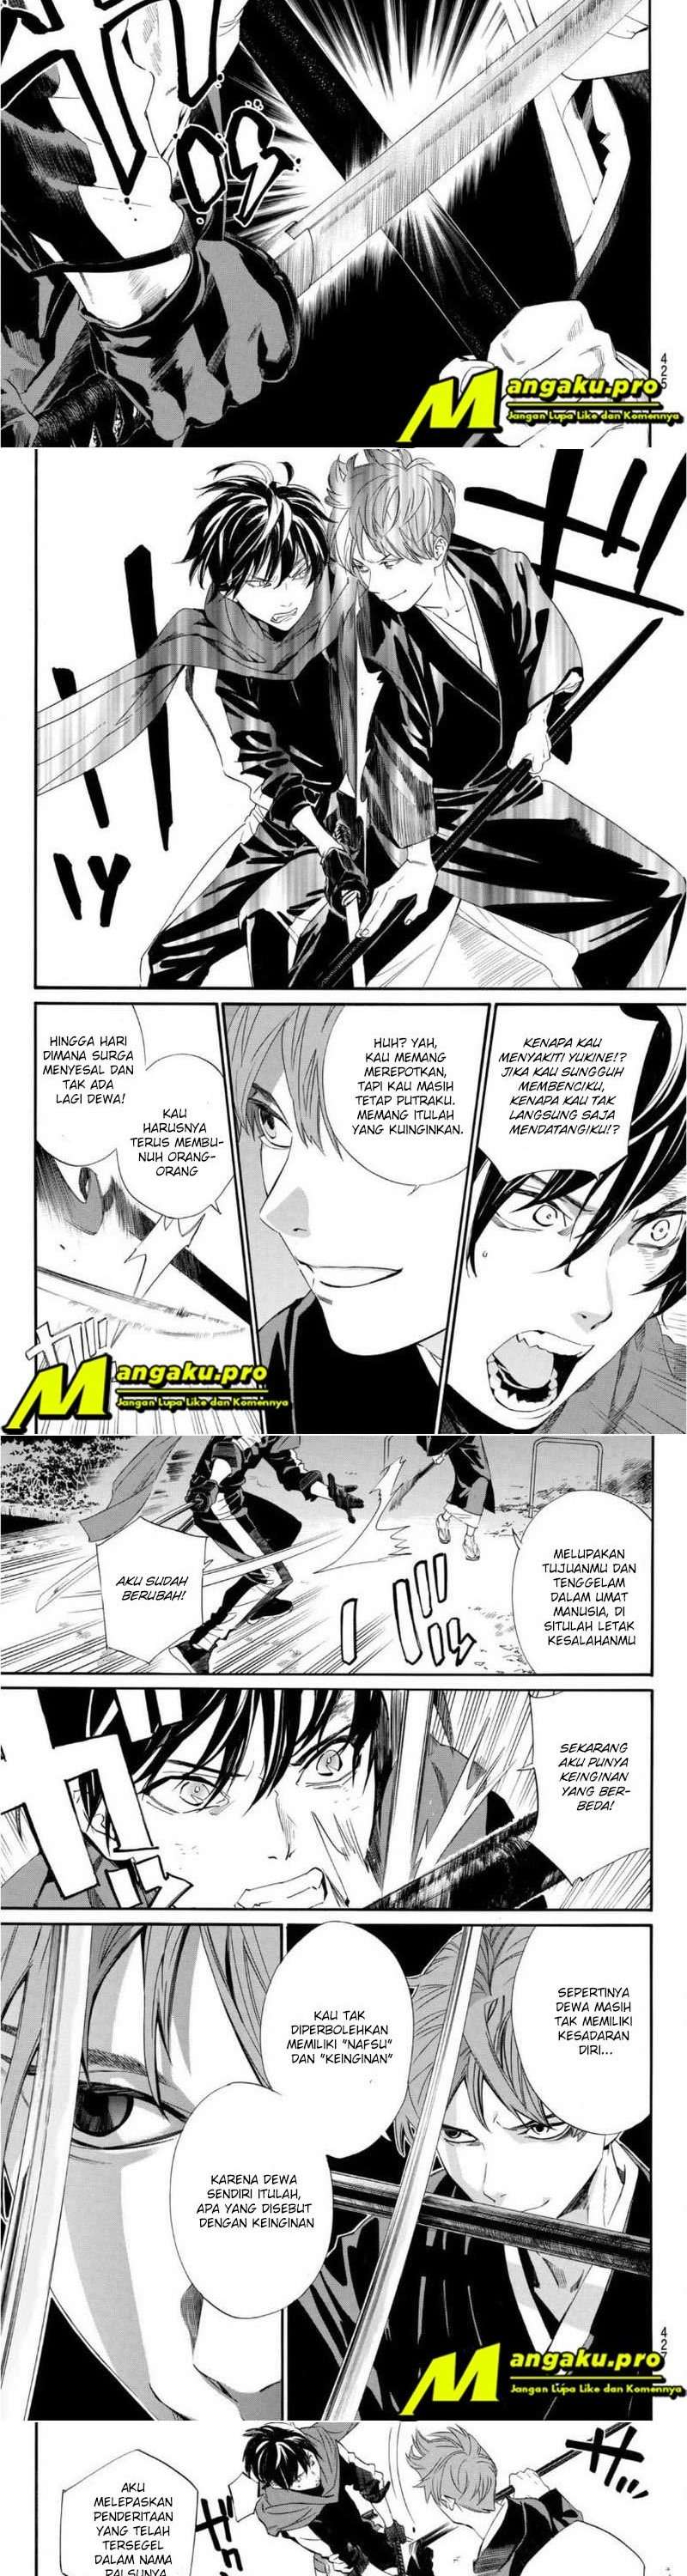 Noragami Chapter 94